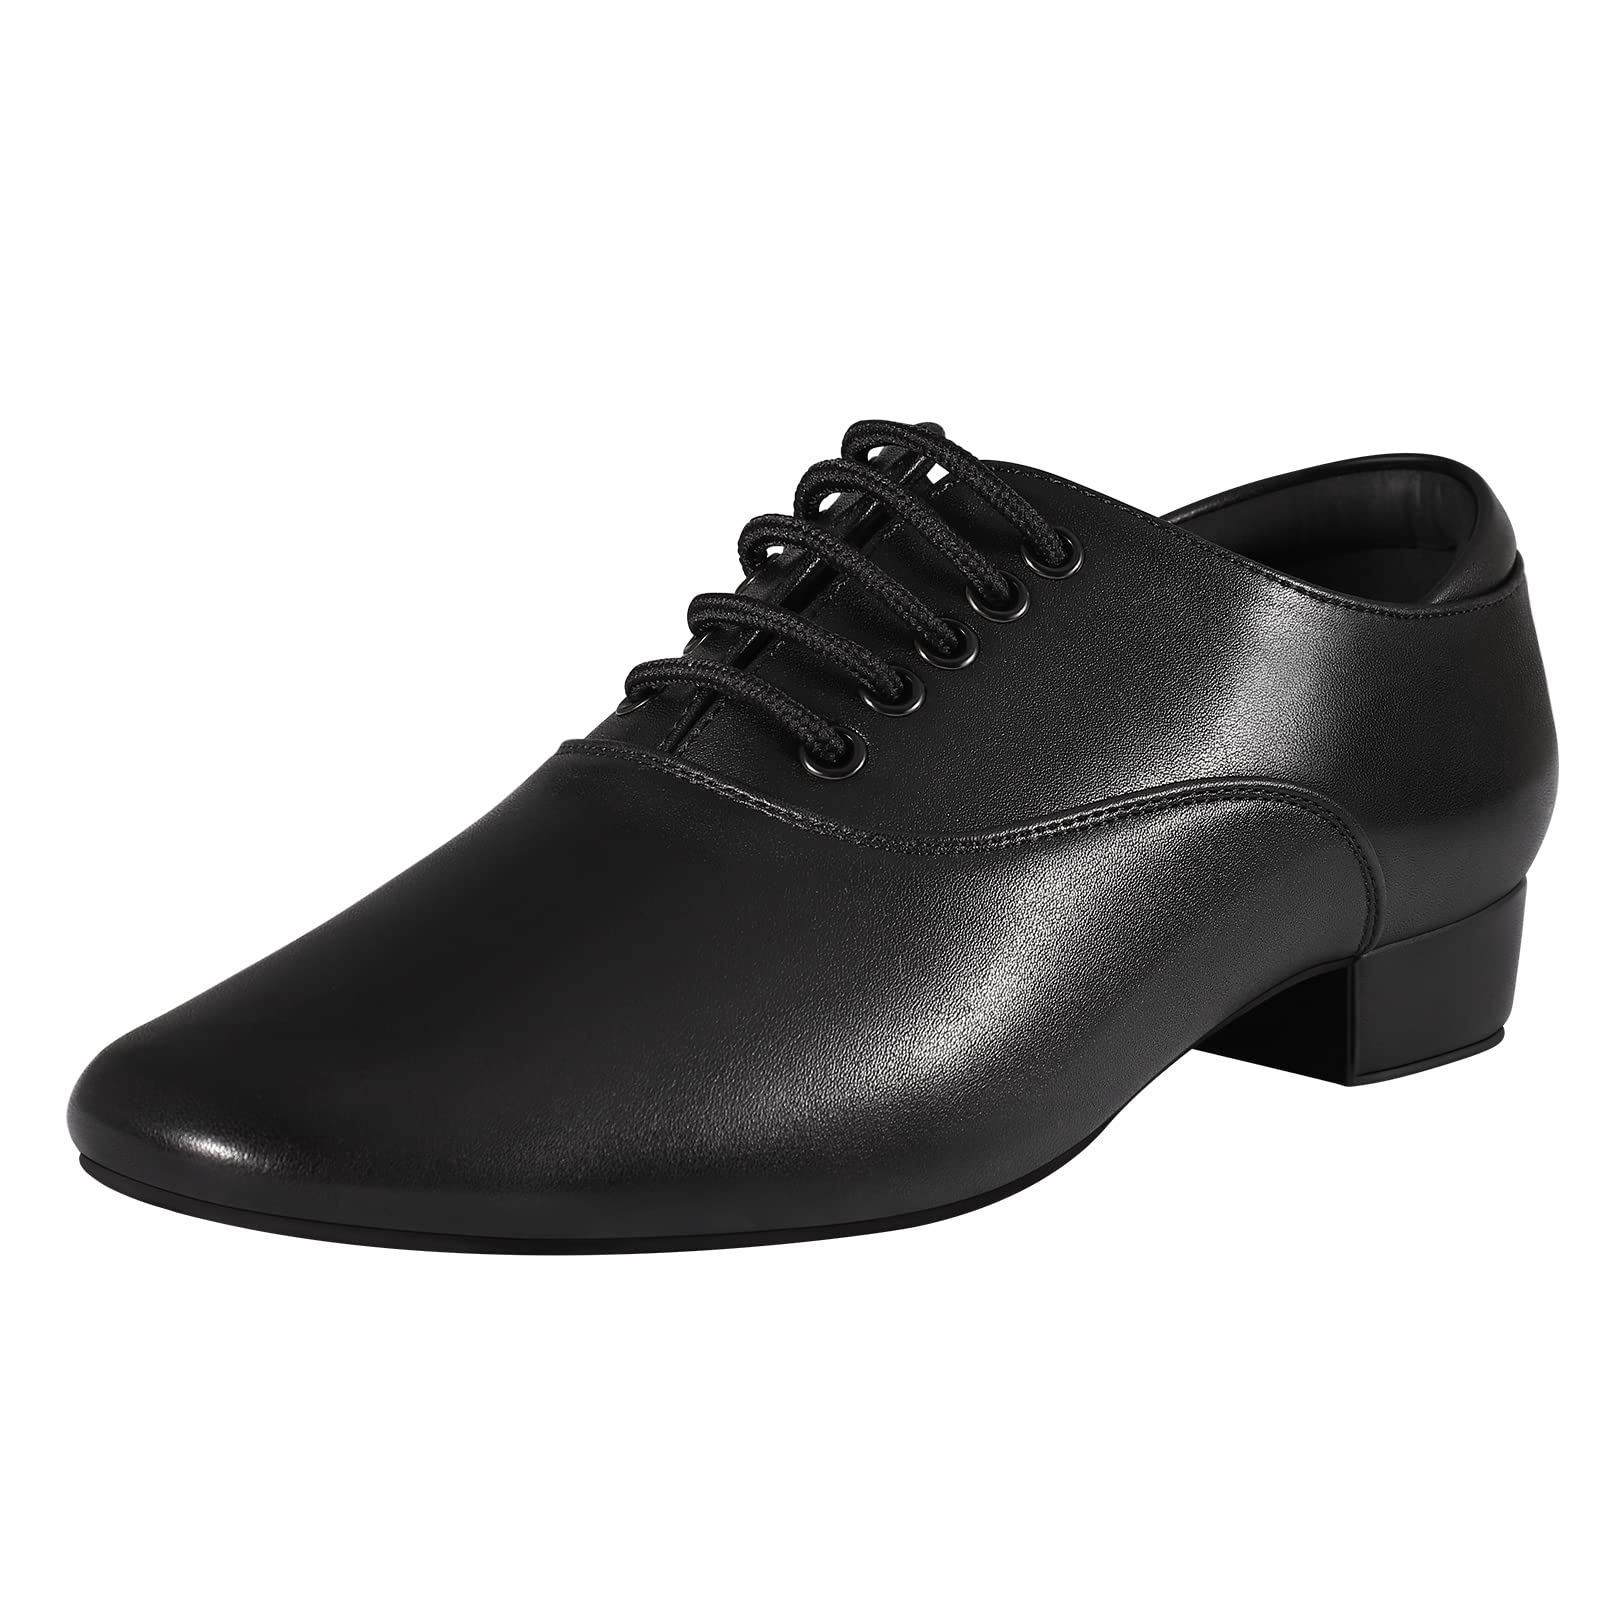 Black Ballroom Dance Shoes Leather Character Shoes for Men's Salsa Latin Tango Dancing